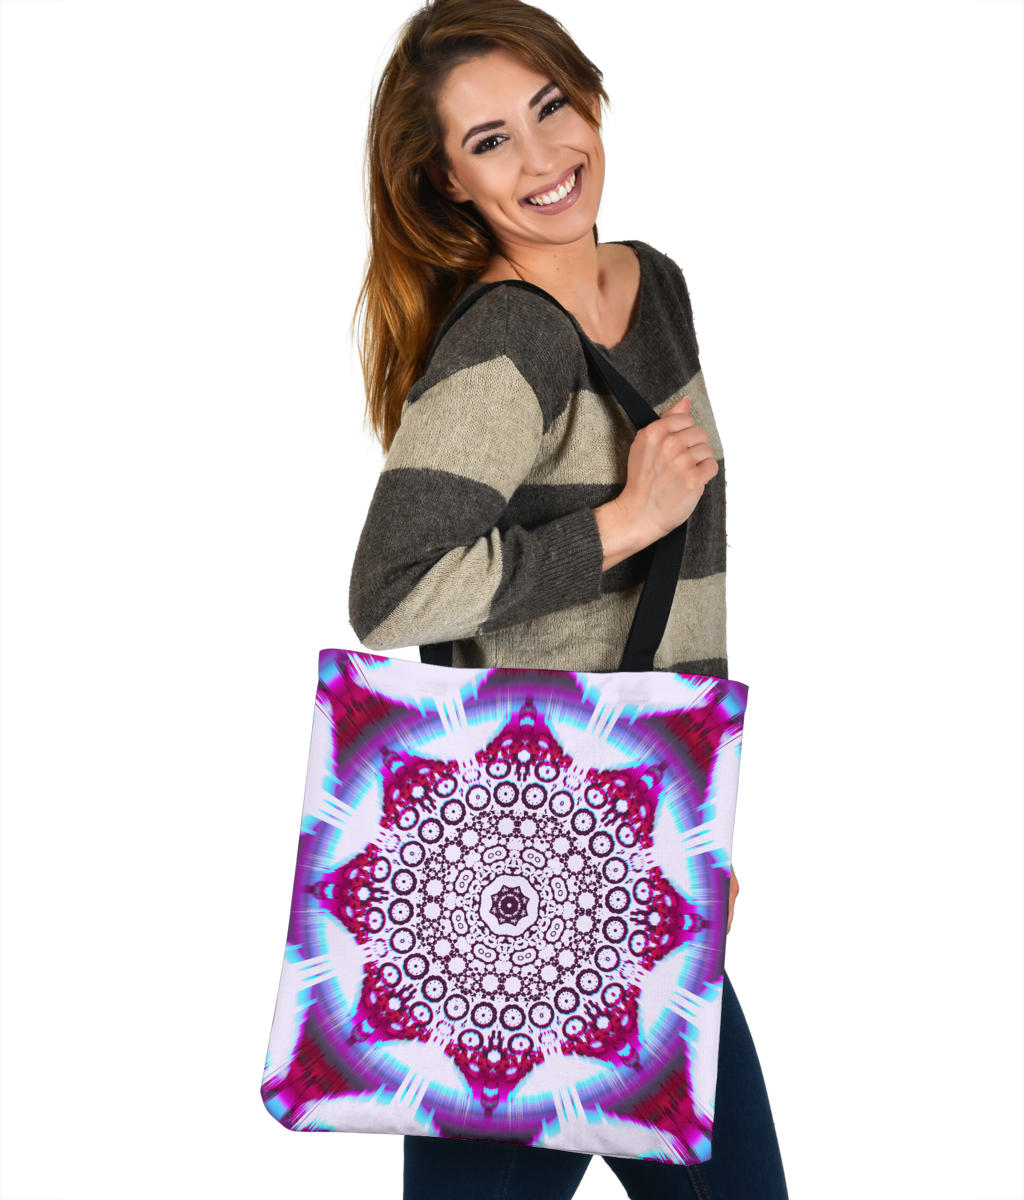 Variations on a Star: 8 | Tote Bag | Makroverset